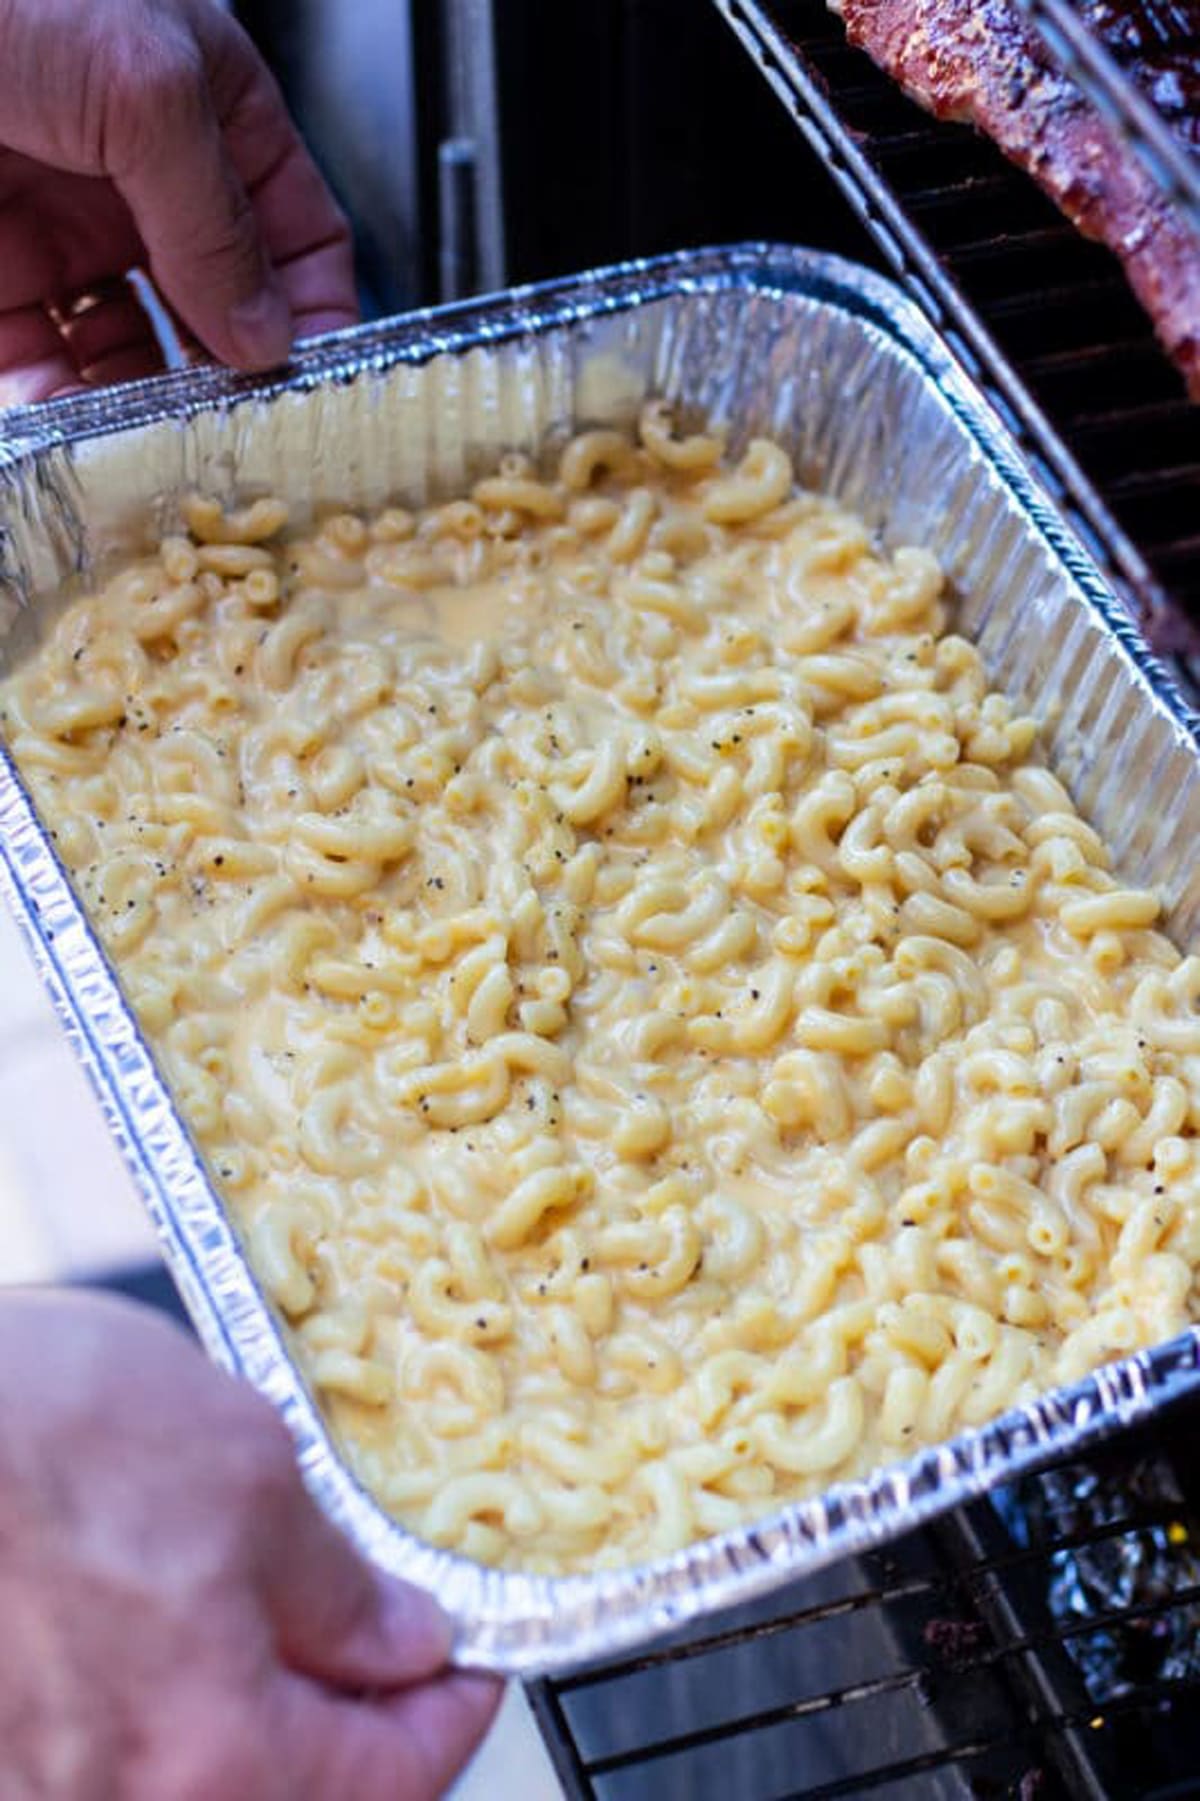 Aluminum pan of macaroni and cheese being placed in a smoker.